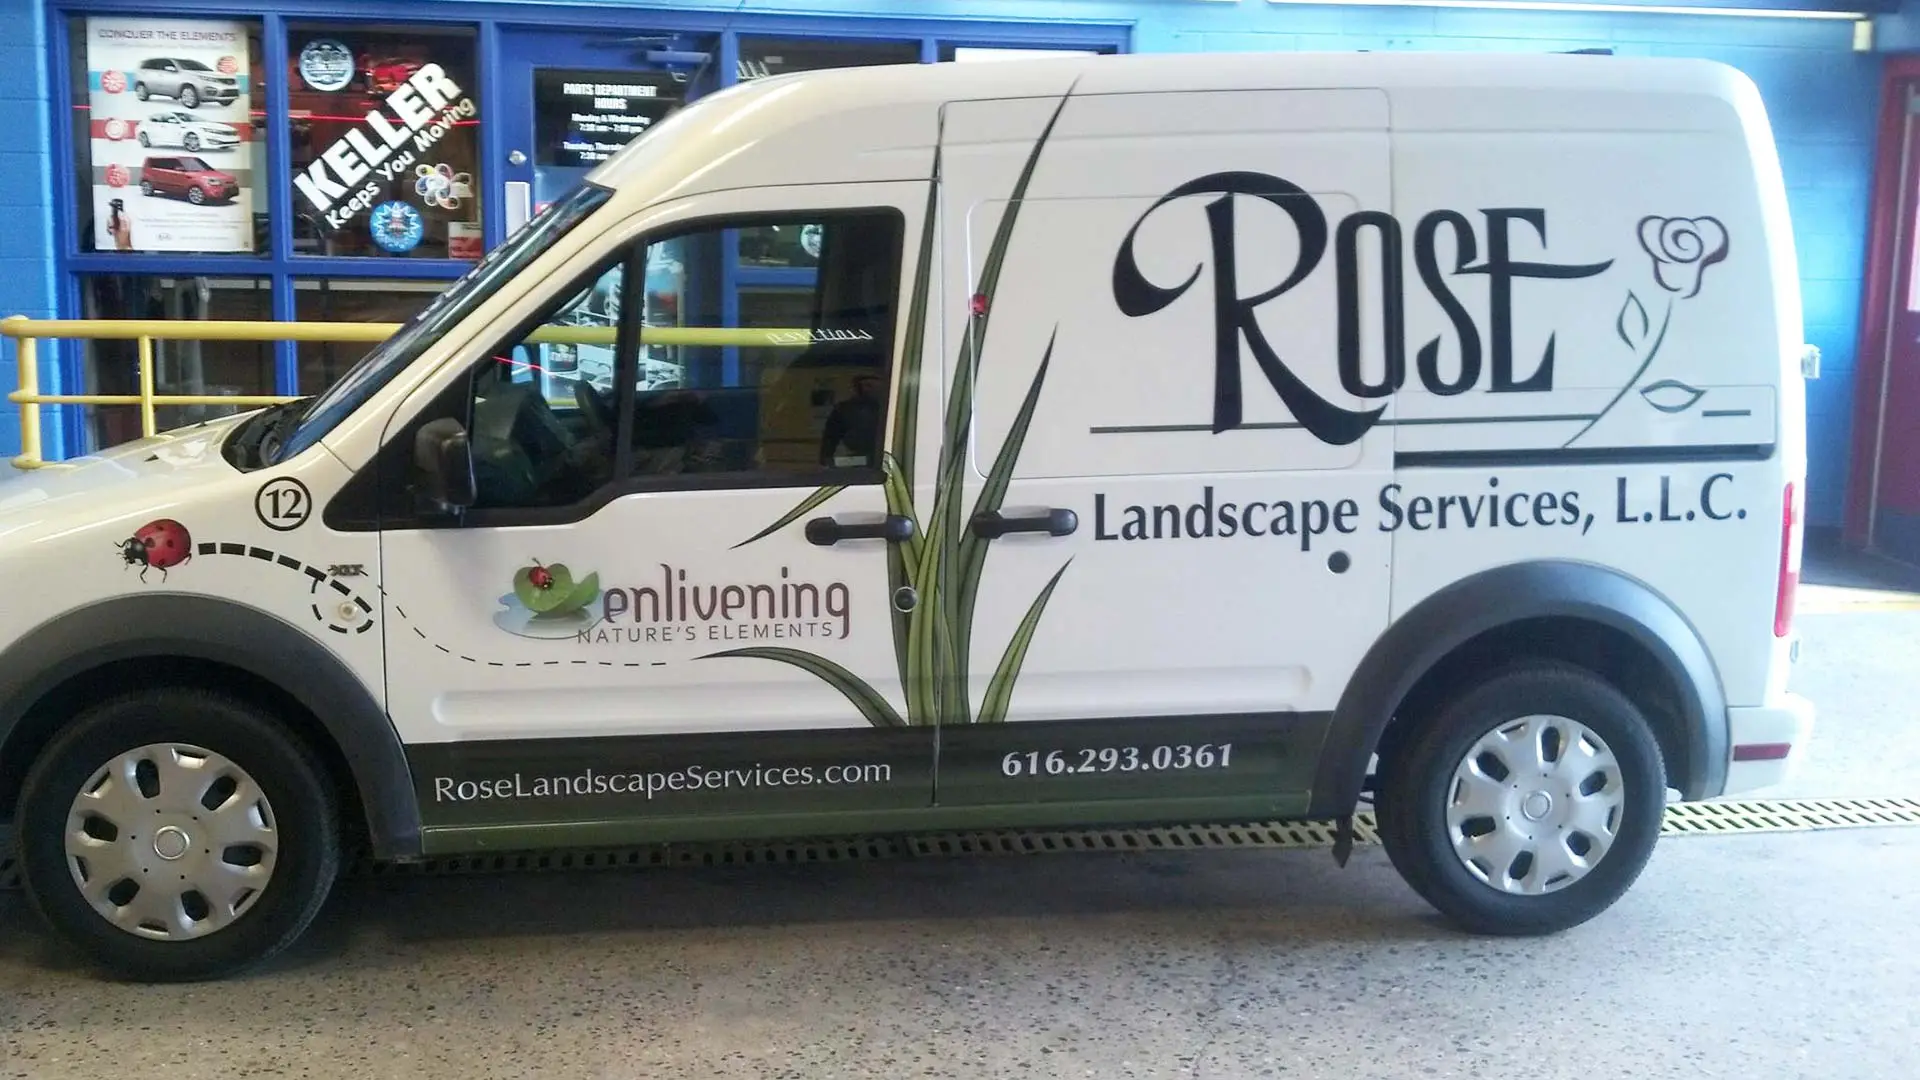 Landscaping company work van with logo and phone number.